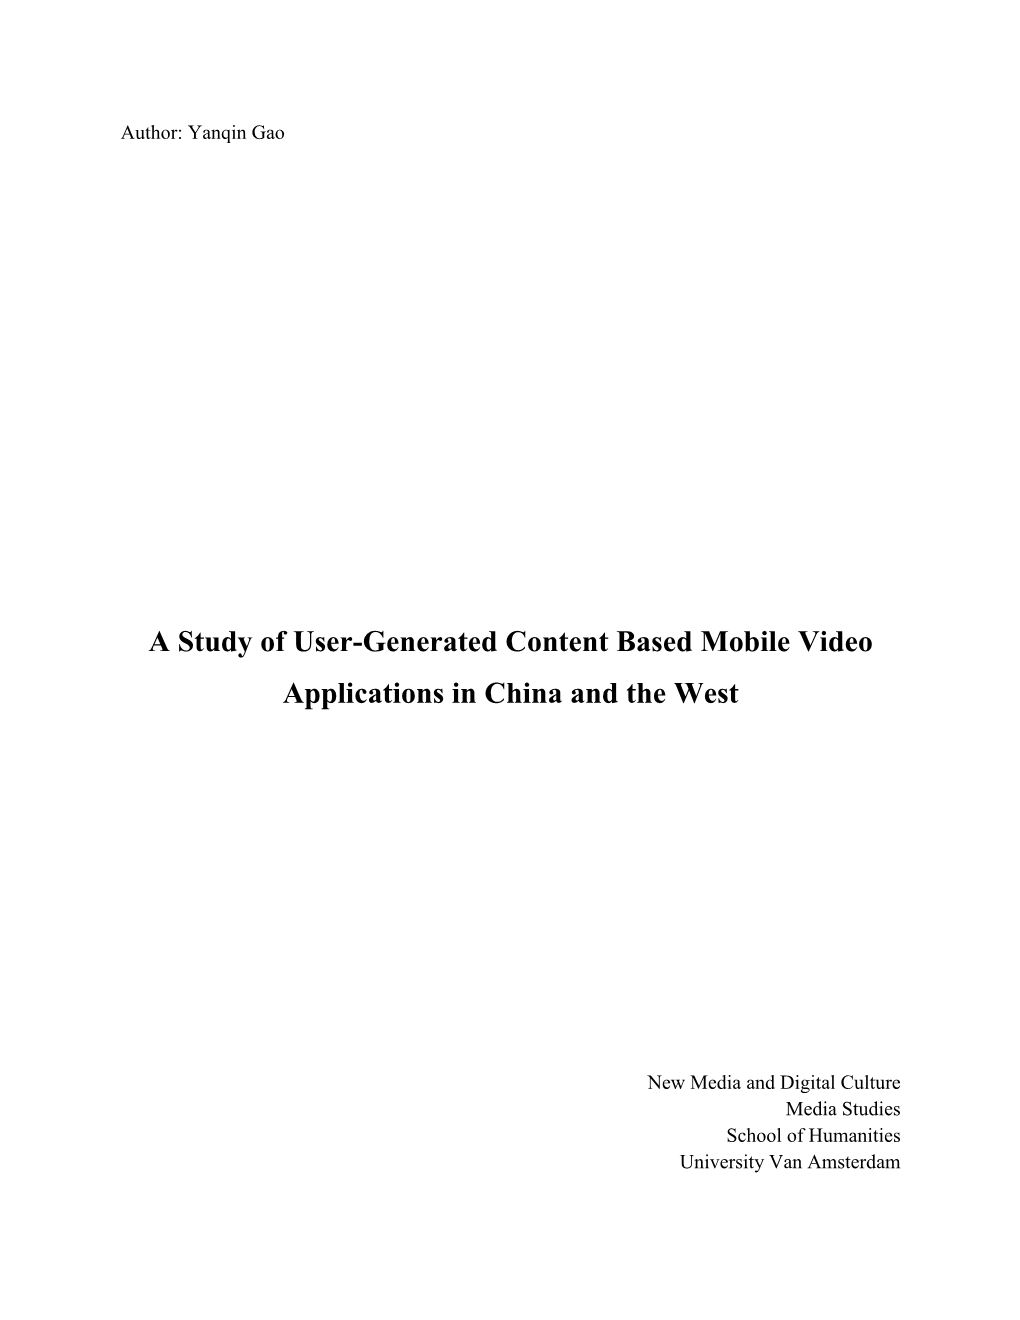 A Study of User-Generated Content Based Mobile Video Applications in China and the West